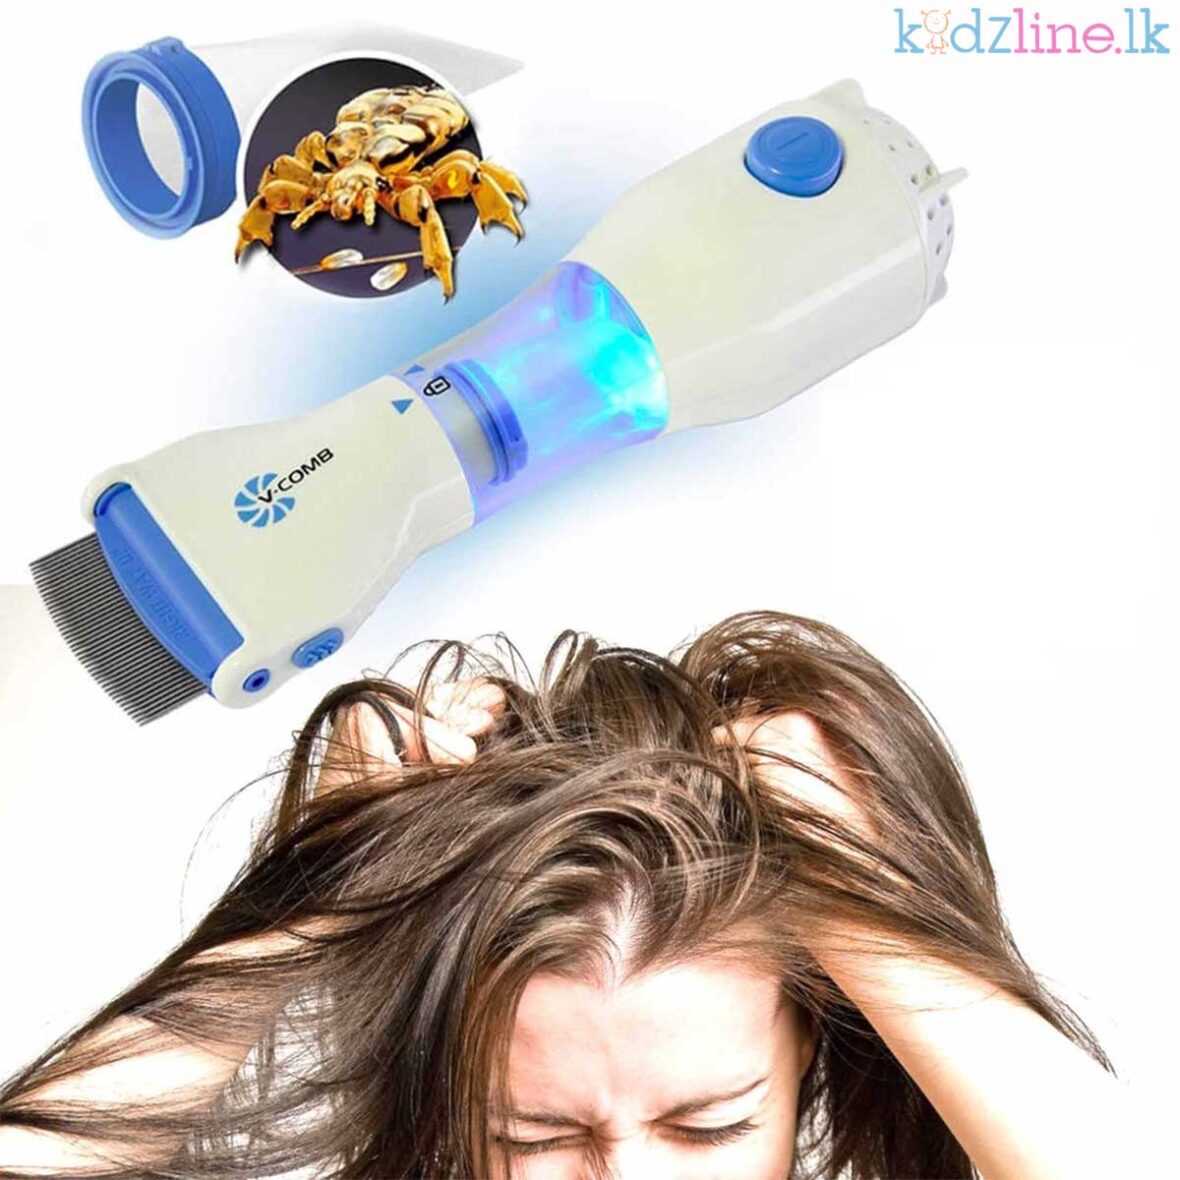 Electric Head Lice Comb – Removes Lice and Eggs